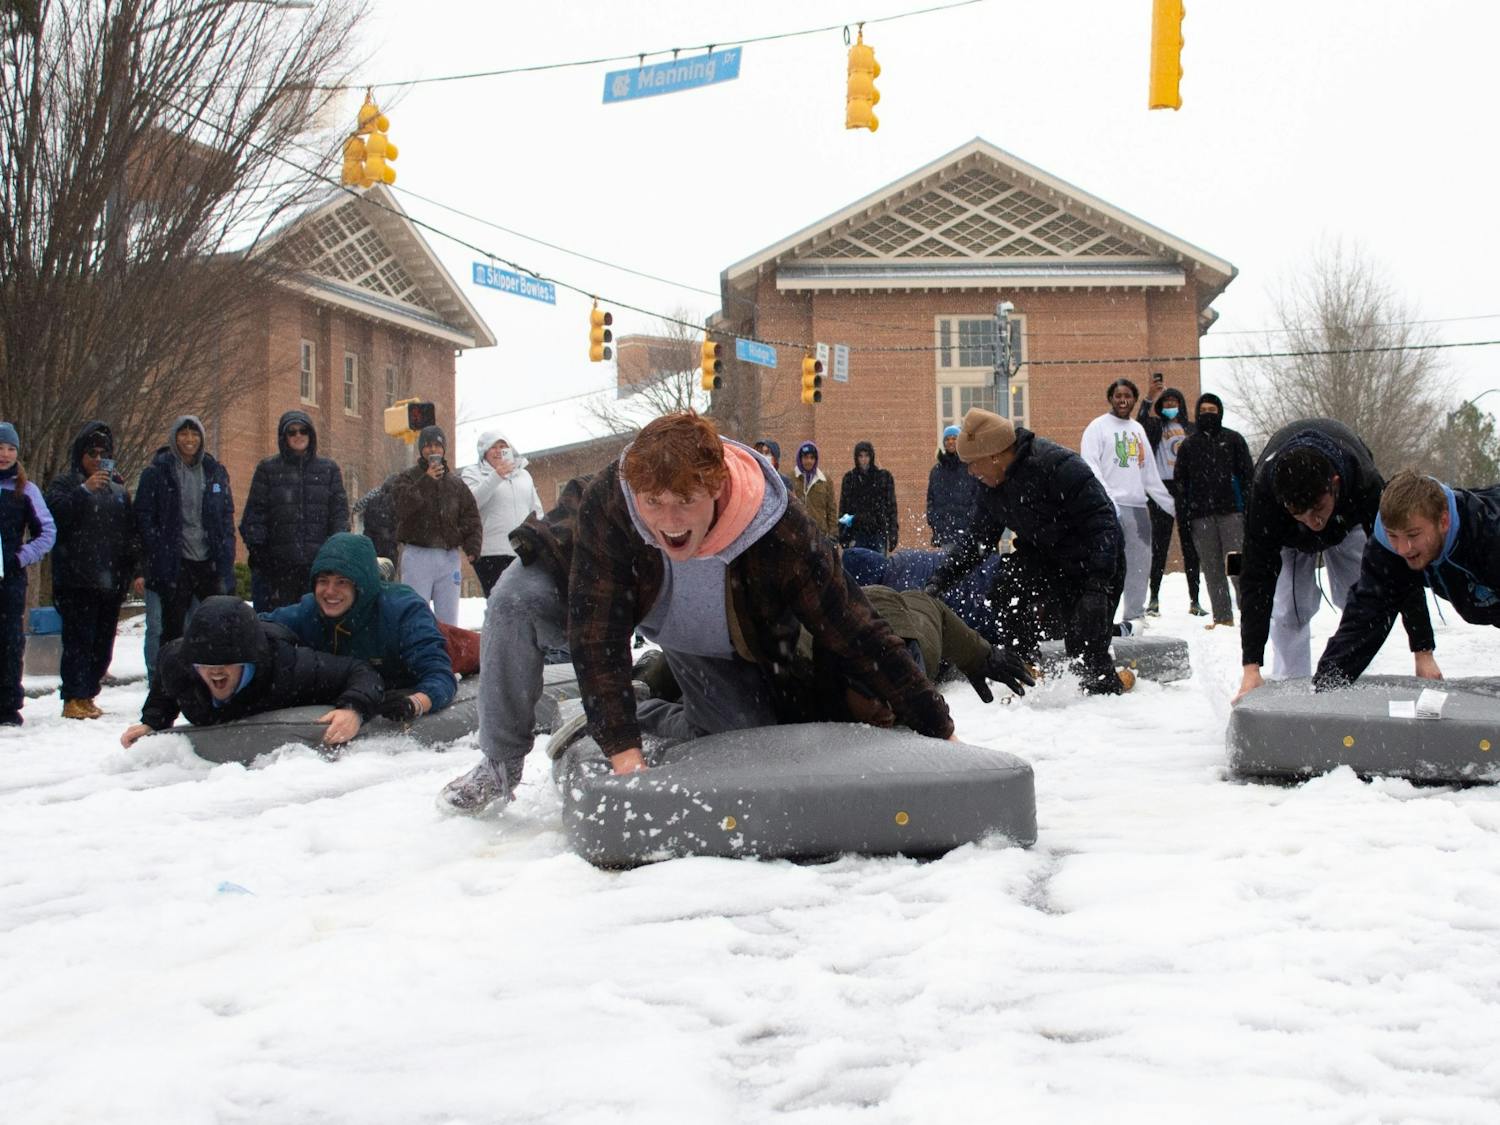 Students have fun in the snow on campus on Jan. 15, 2022.